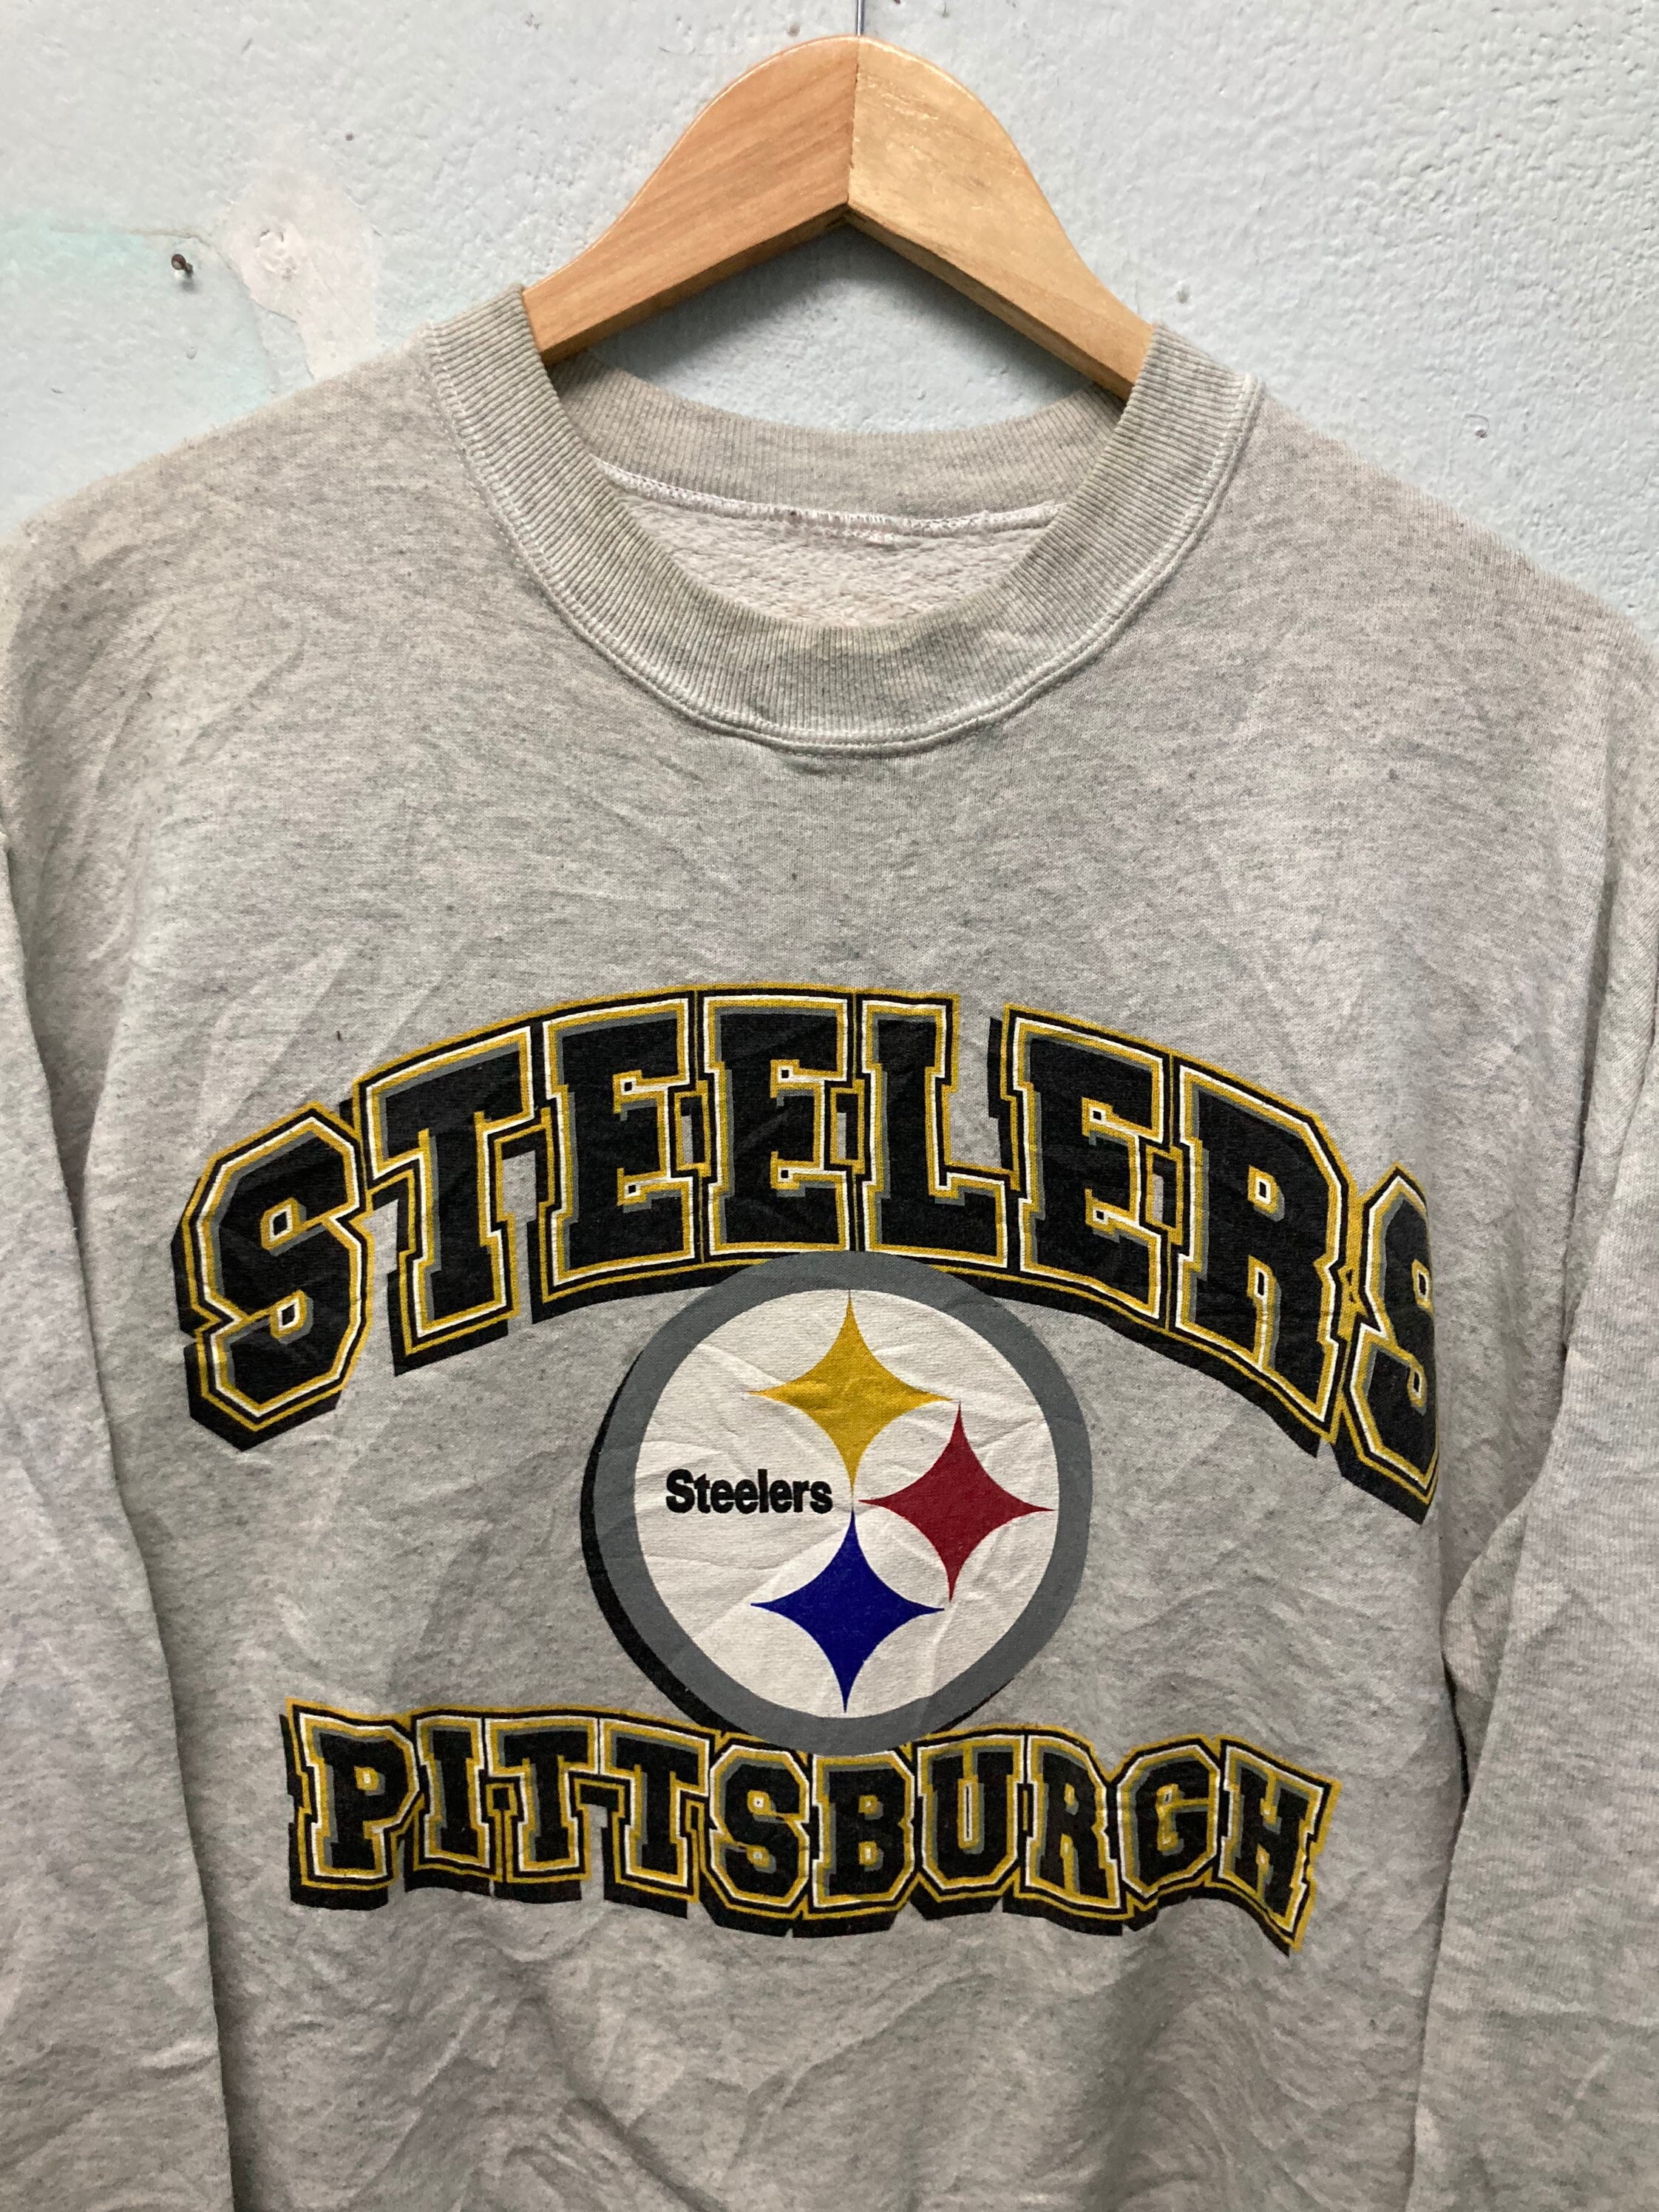 Vintage Pittsburgh Steelers Sweater size L | Etsy